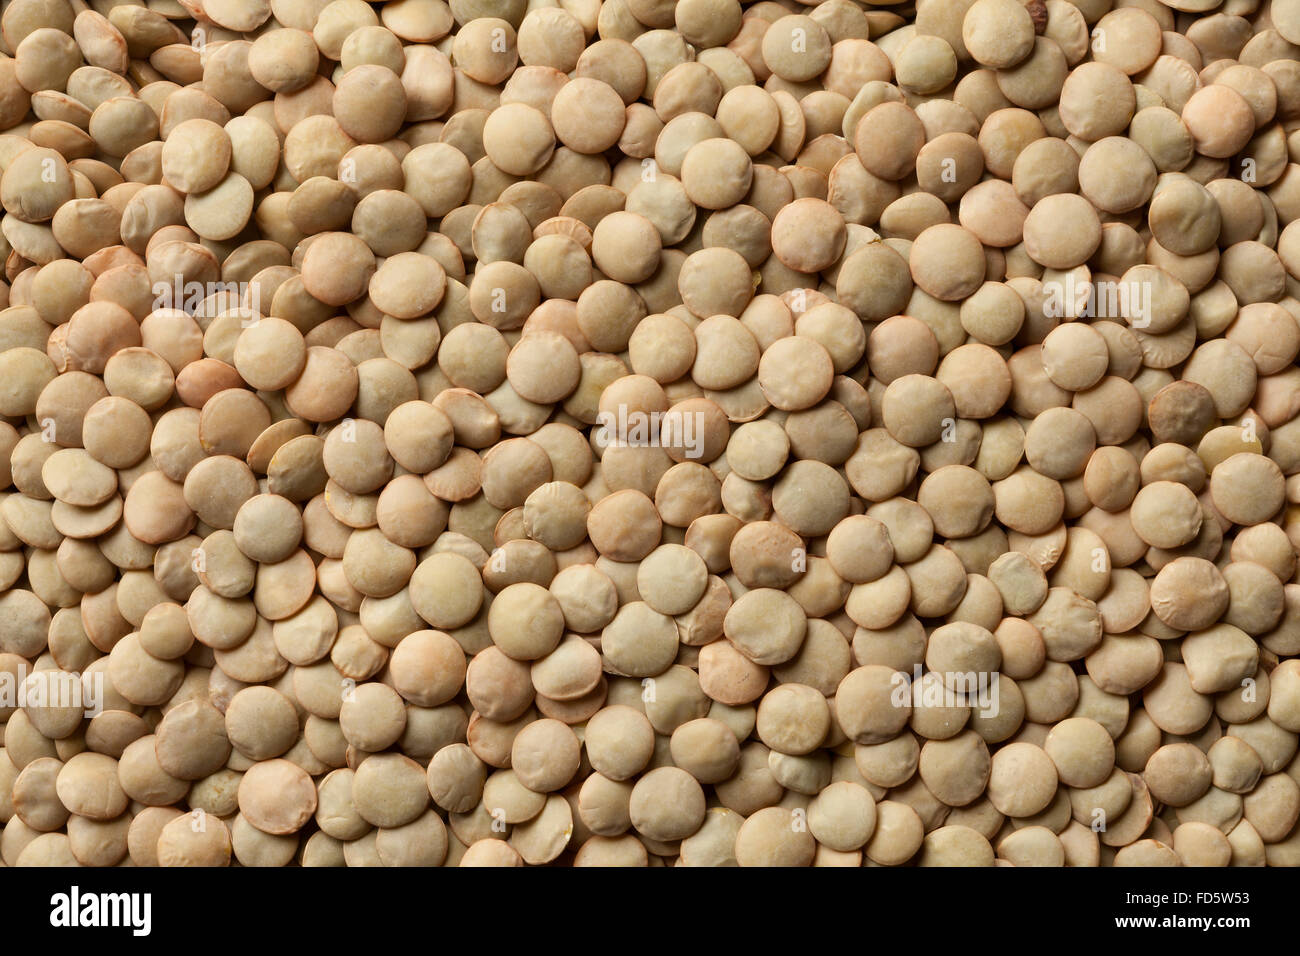 Dried brown lentils full frame Stock Photo